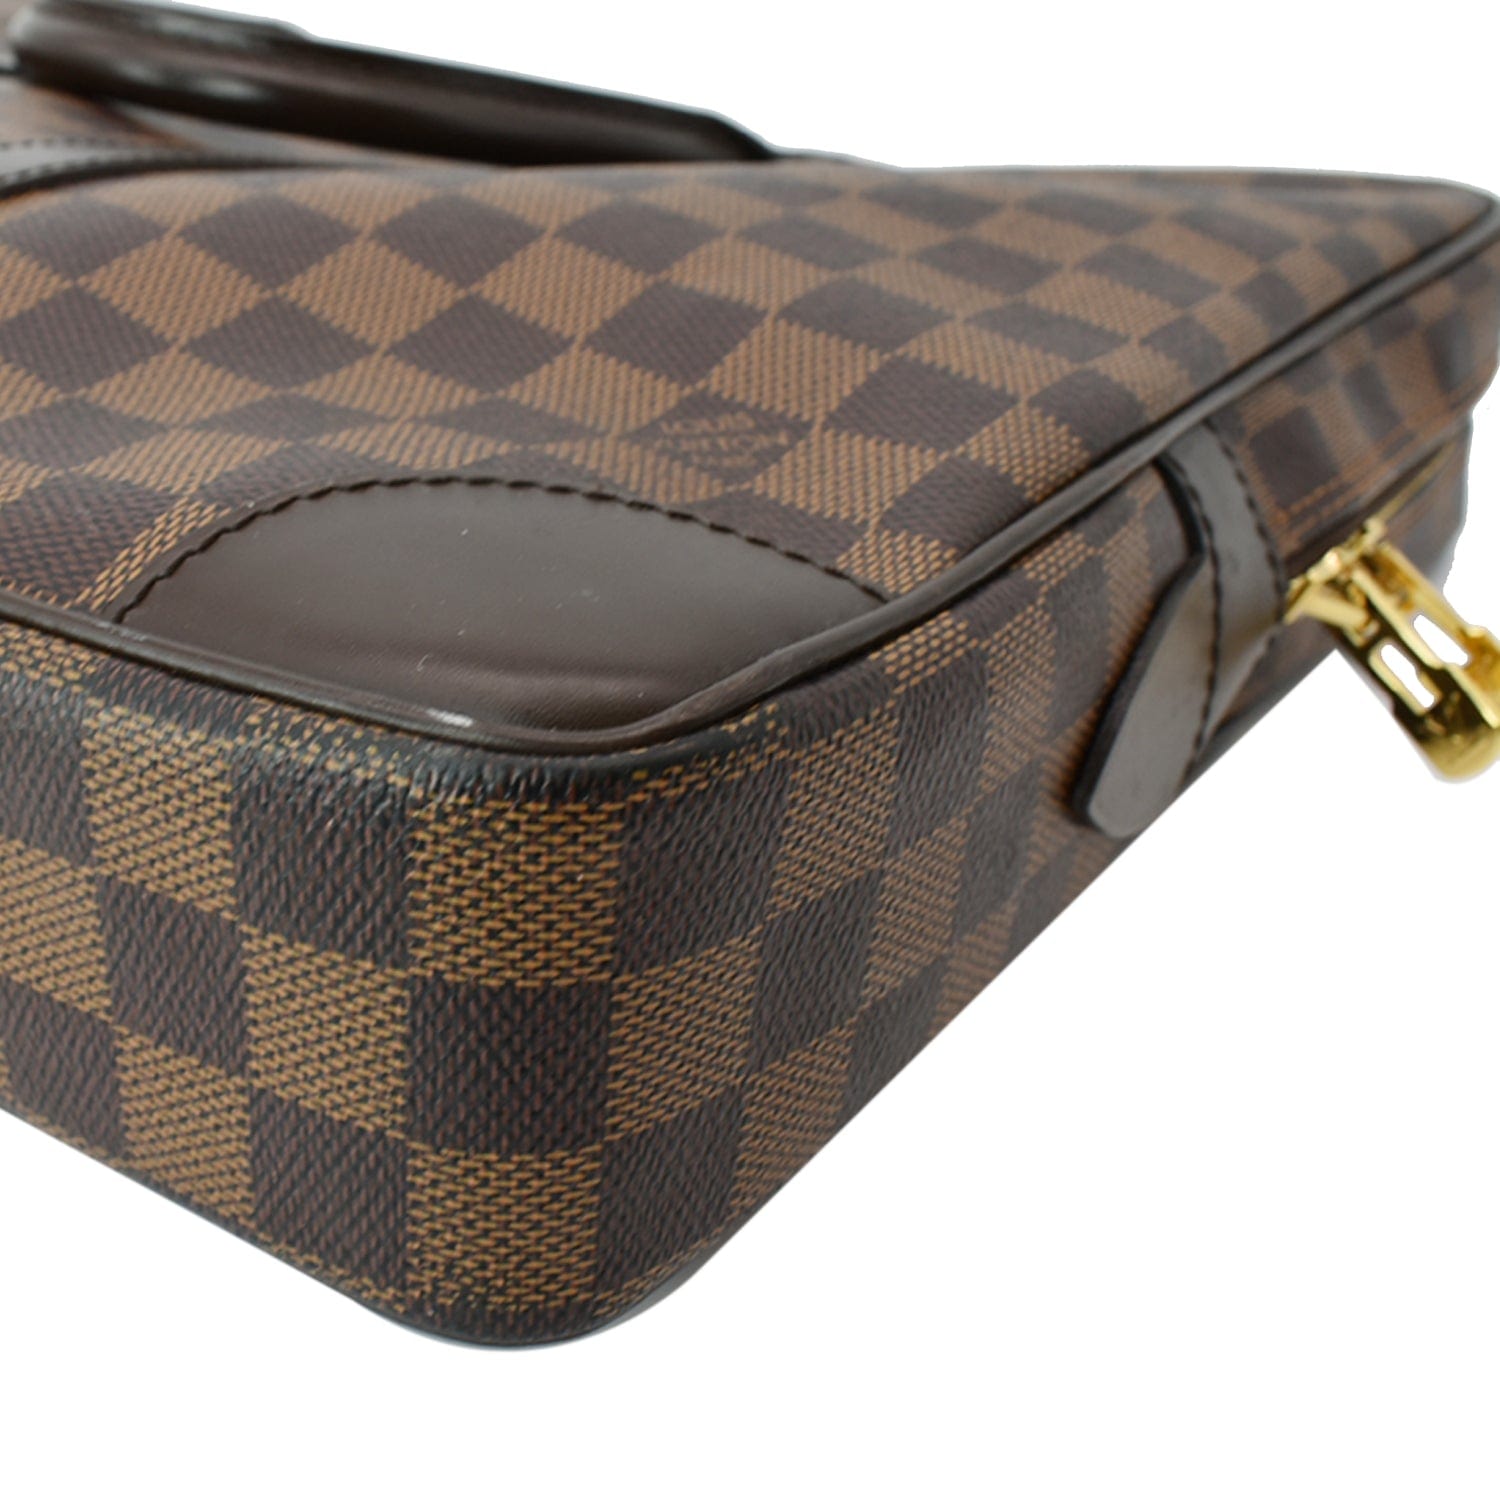 Porte documents voyage leather bag Louis Vuitton Brown in Leather - 23203467